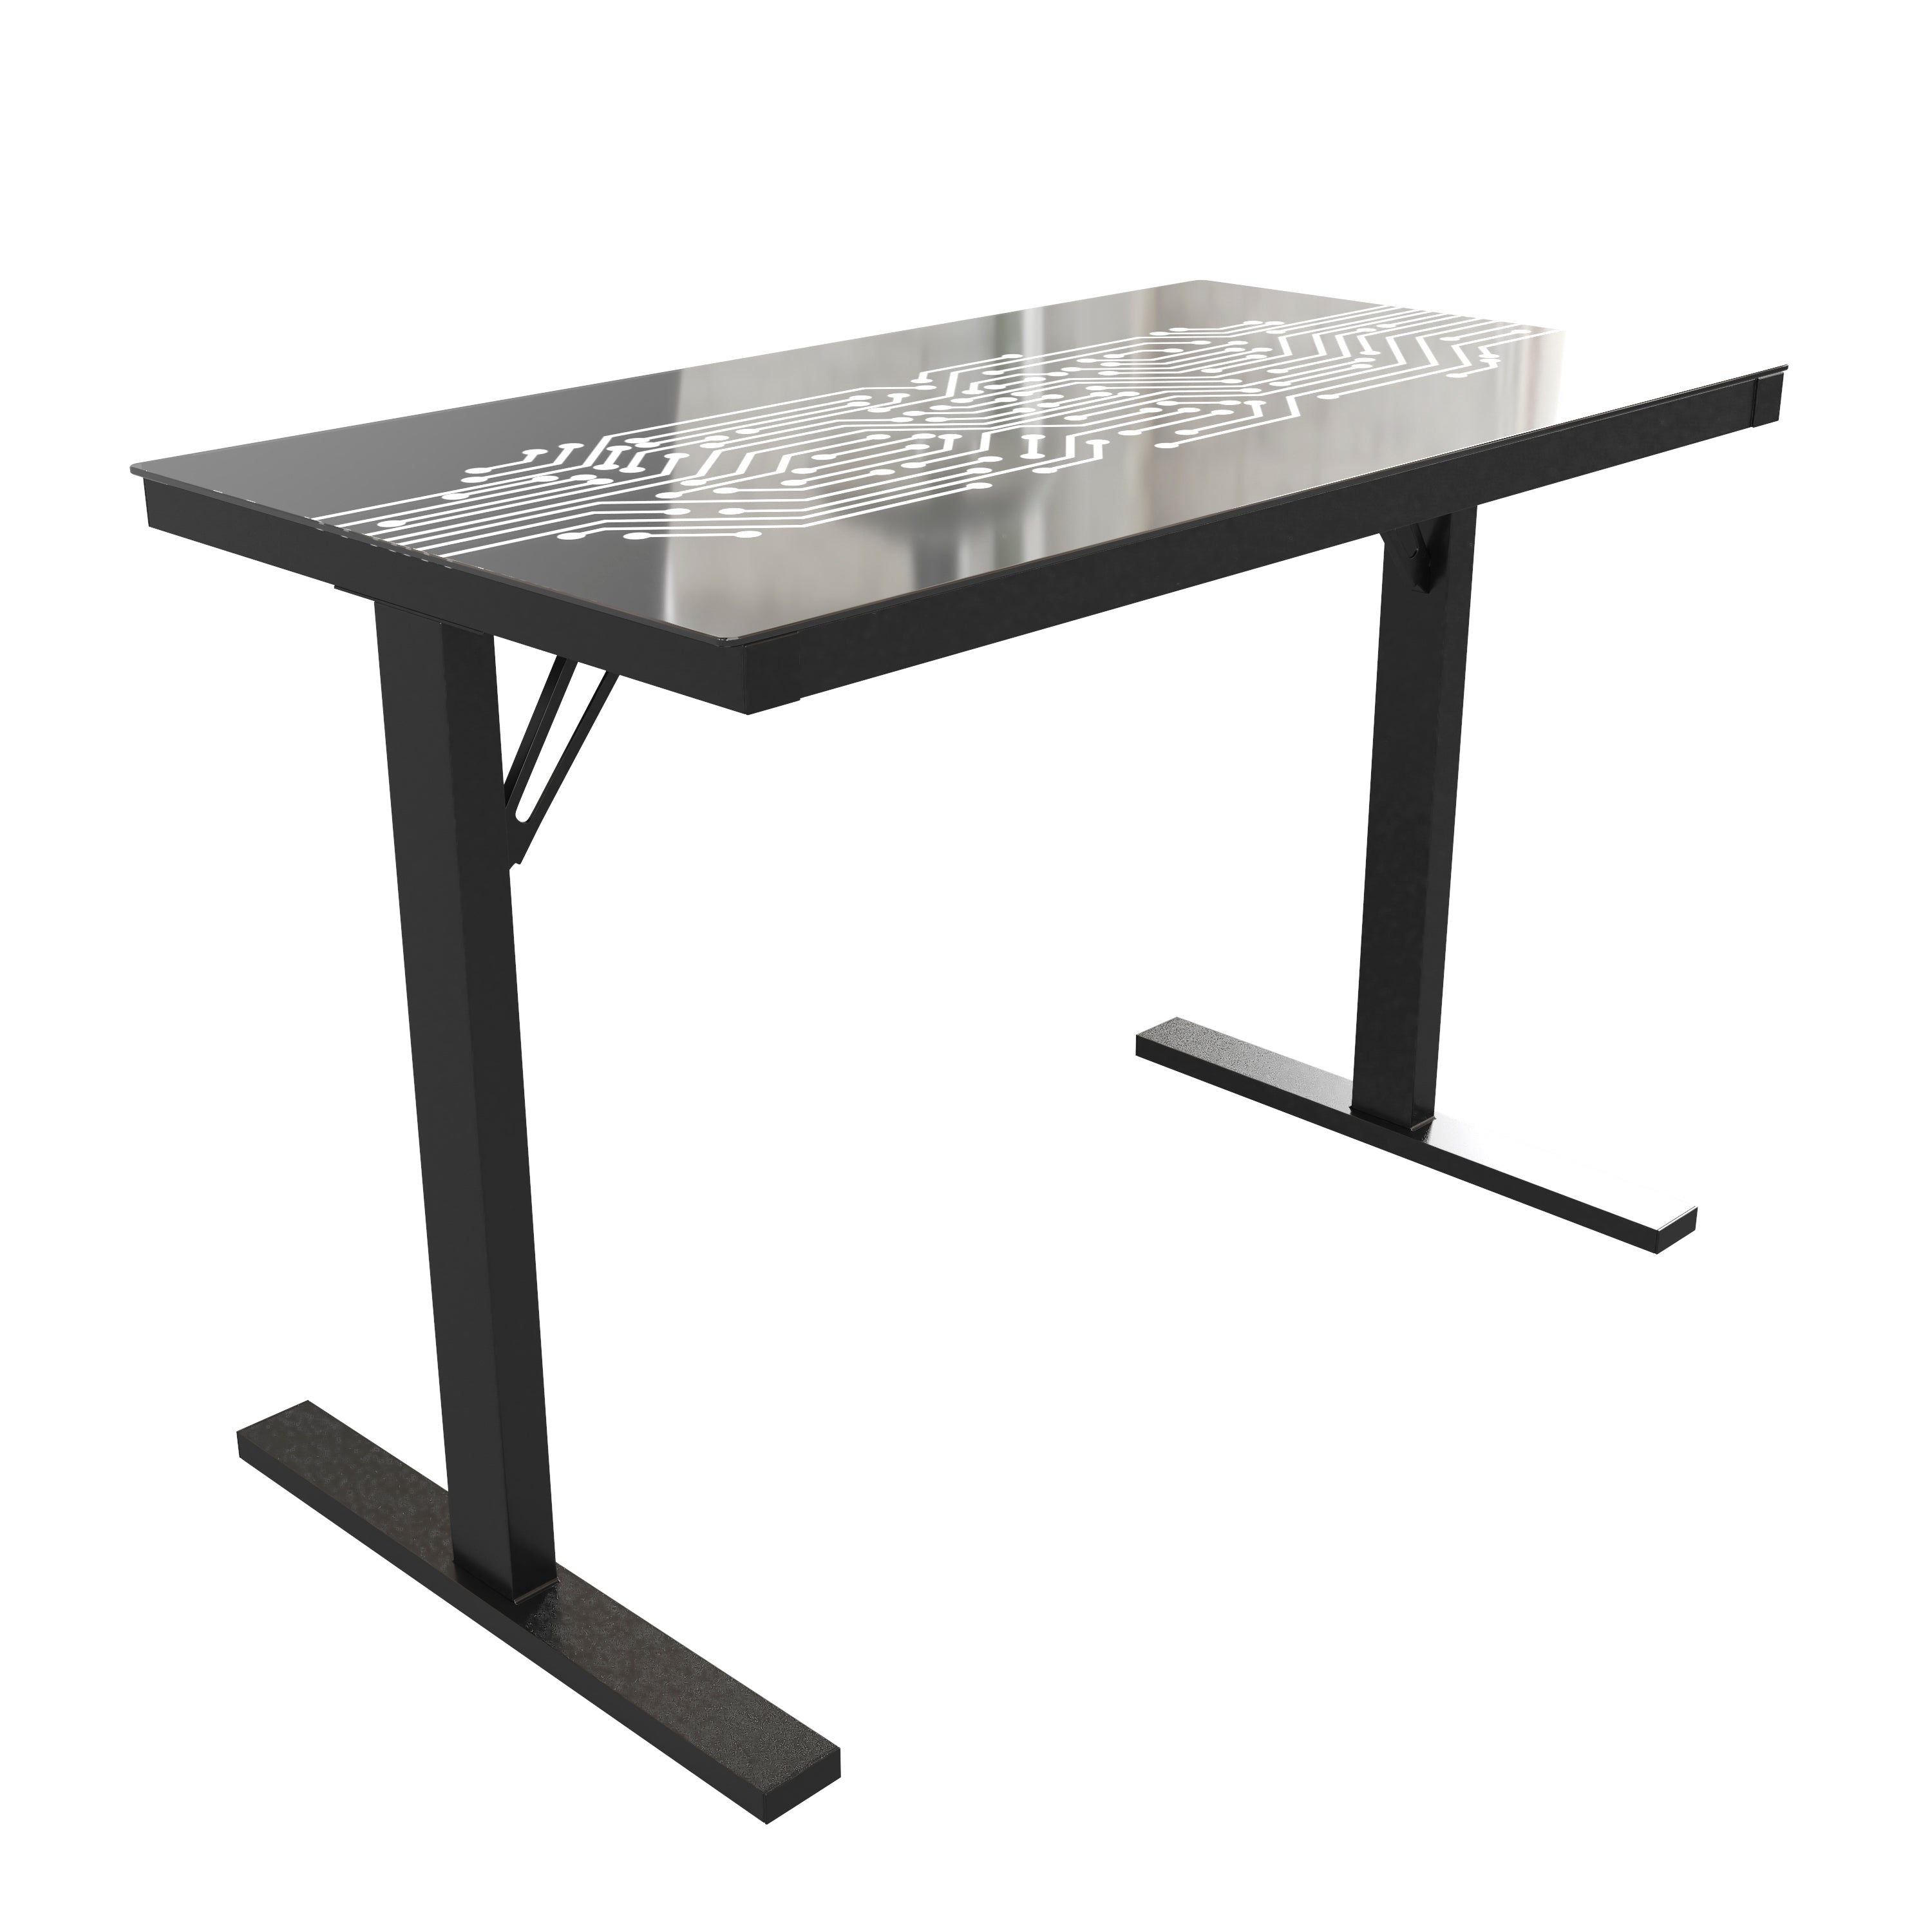 Shan 43" Commercial Grade Gaming Desk with LED Lights, Tempered Glass Desktop, Home or Office Computer Table, Steel Frame with LED Light Remote-Gaming Desk-Flash Furniture-Wall2Wall Furnishings